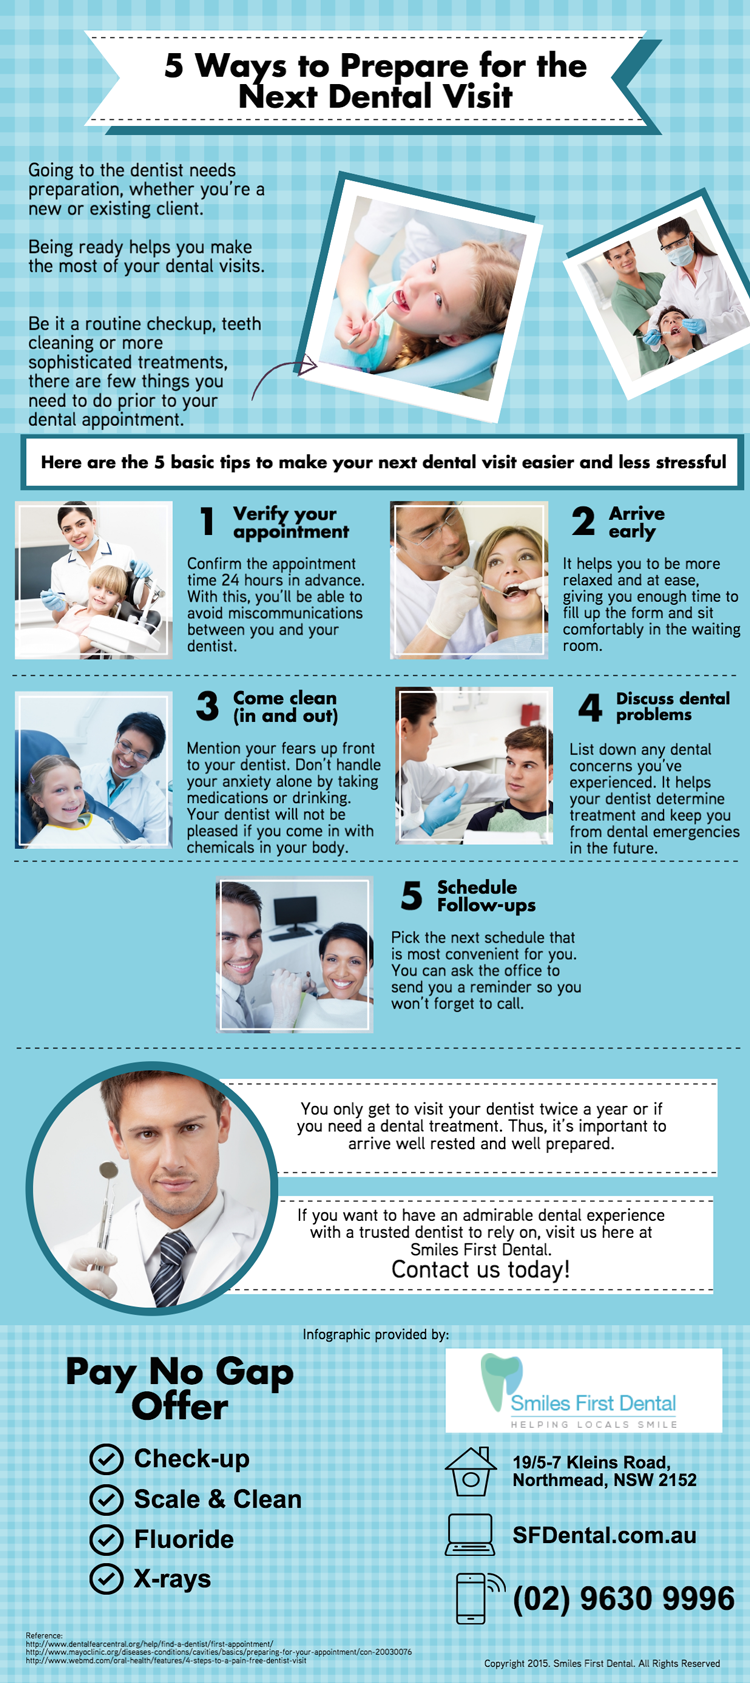 How to Prepare for Your Next Dental Visit